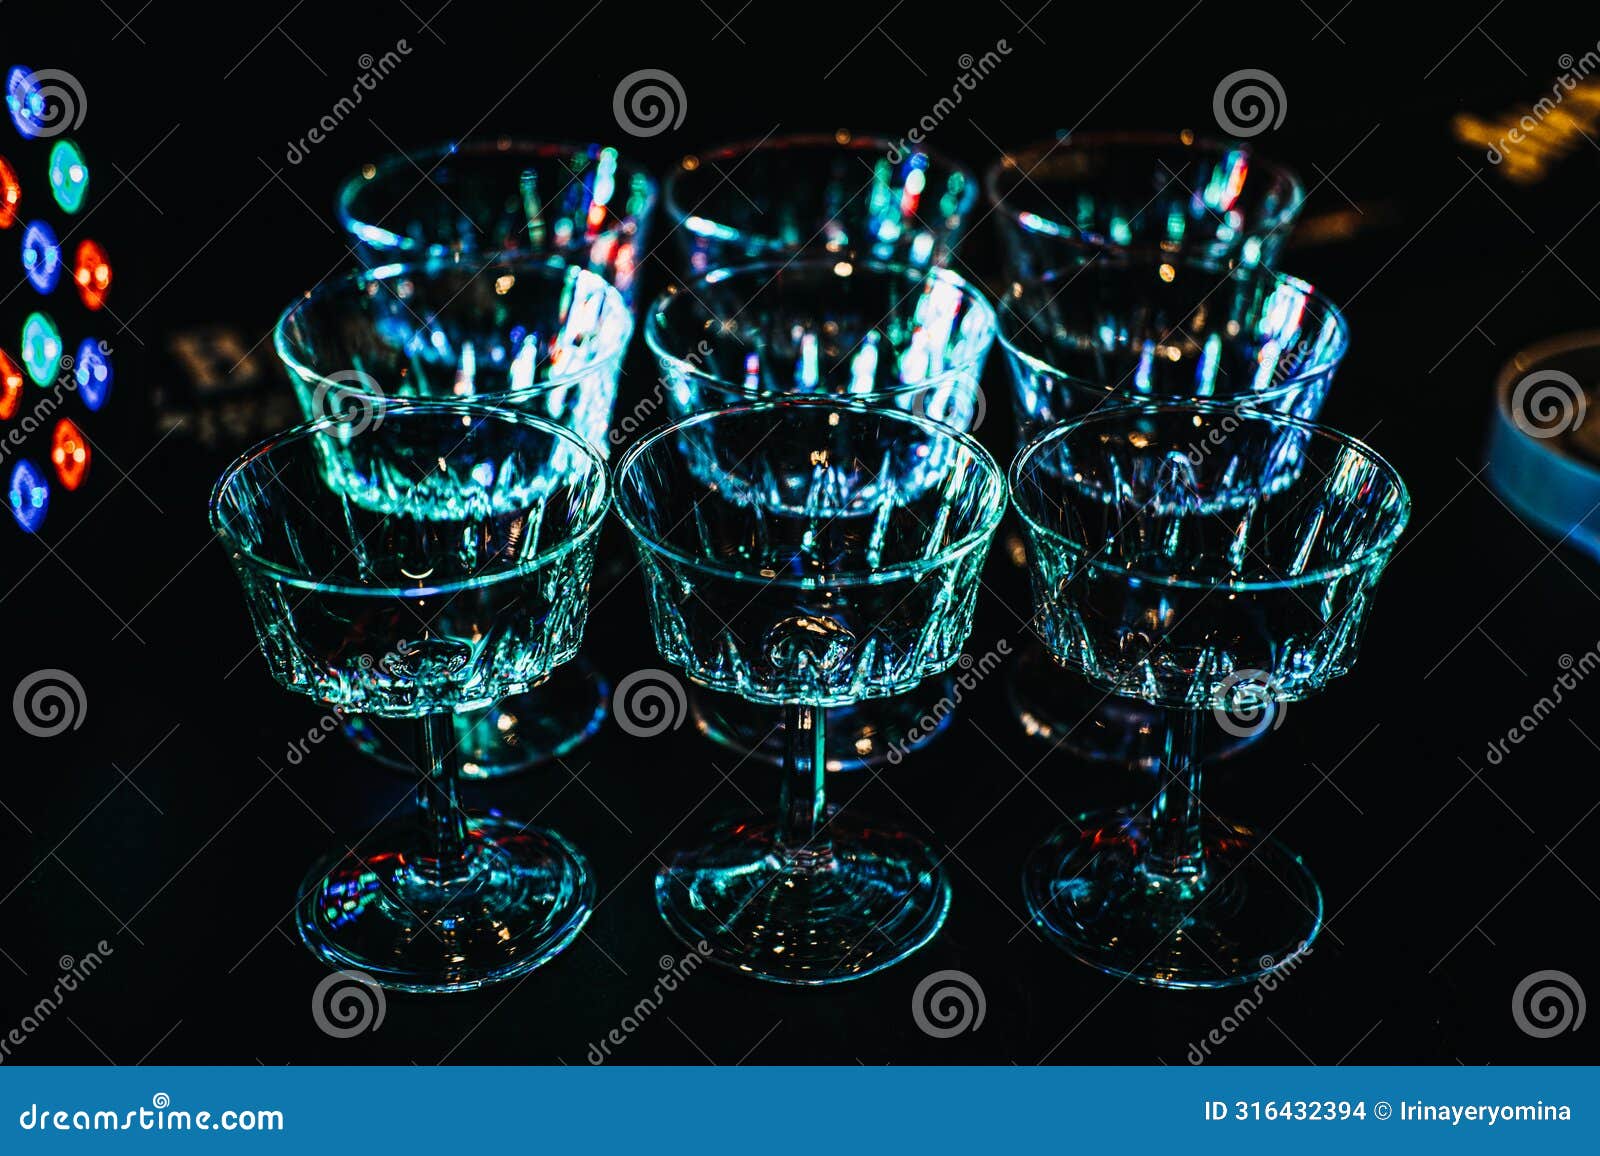 shimmering glassware in the vibrant ambiance of a cocktail party